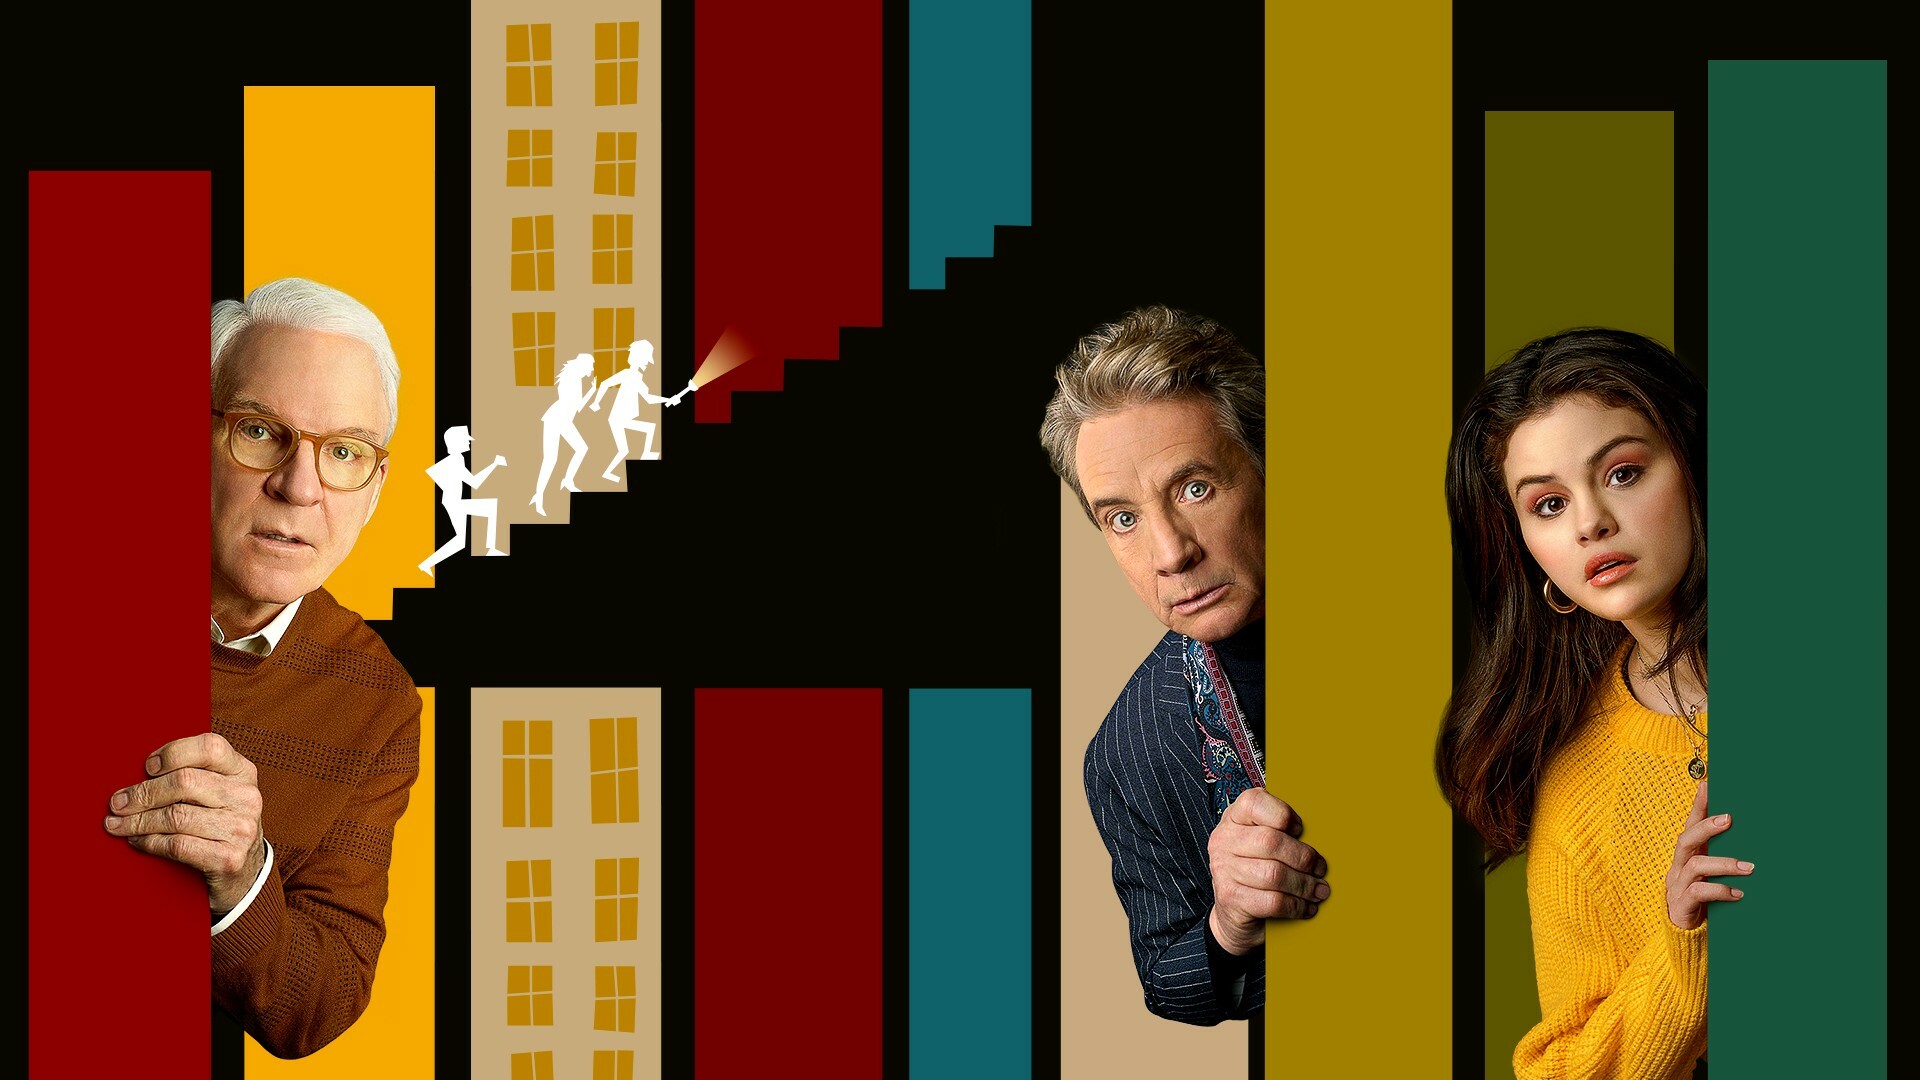 Only Murders in the Building: A comedic murder-mystery starring Steve Martin, Martin Short and Selena Gomez. 1920x1080 Full HD Wallpaper.